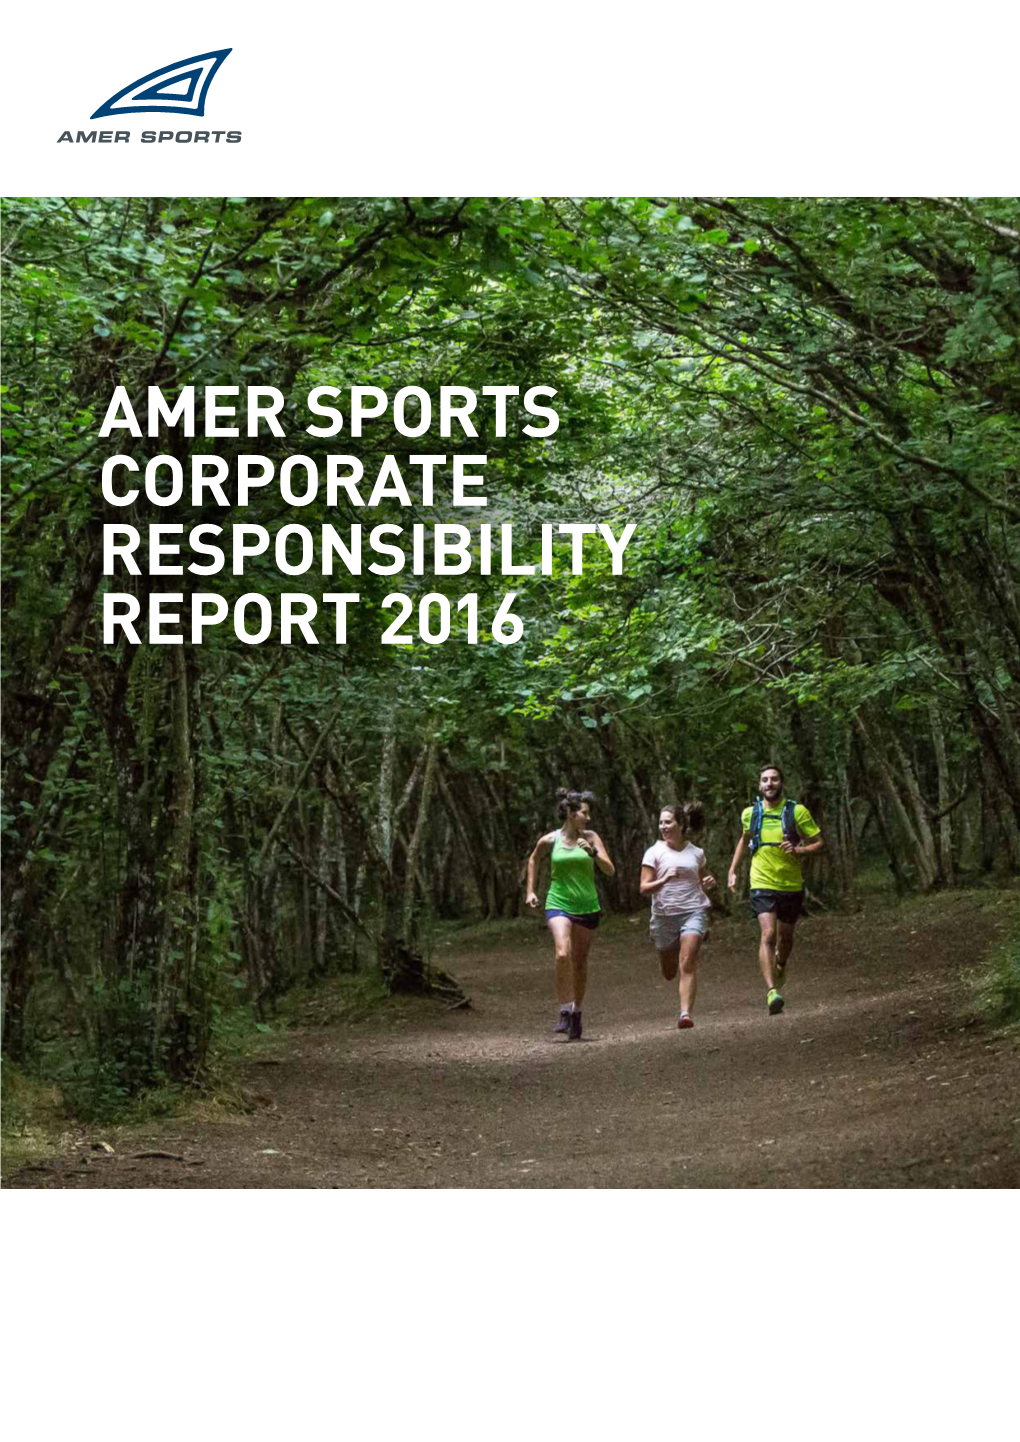 AMER SPORTS CORPORATE RESPONSIBILITY REPORT 2016 Amer Sports Sustainability and Business